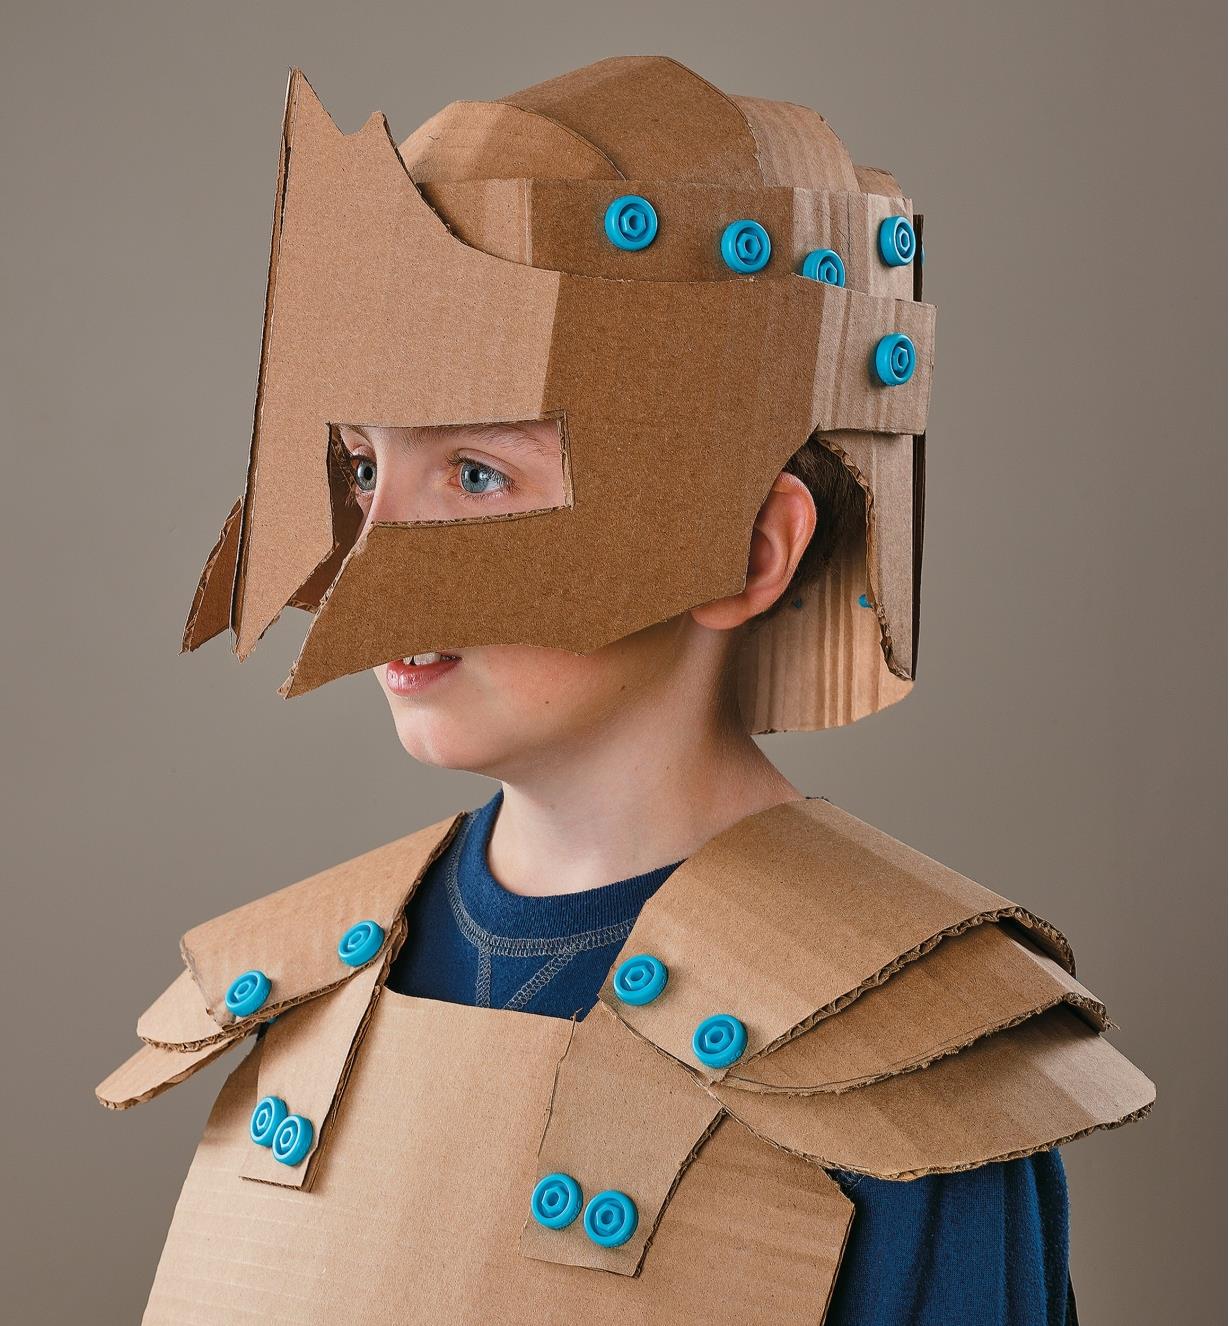 Child wearing a suit of armor made using the Makedo Cardboard-Building System